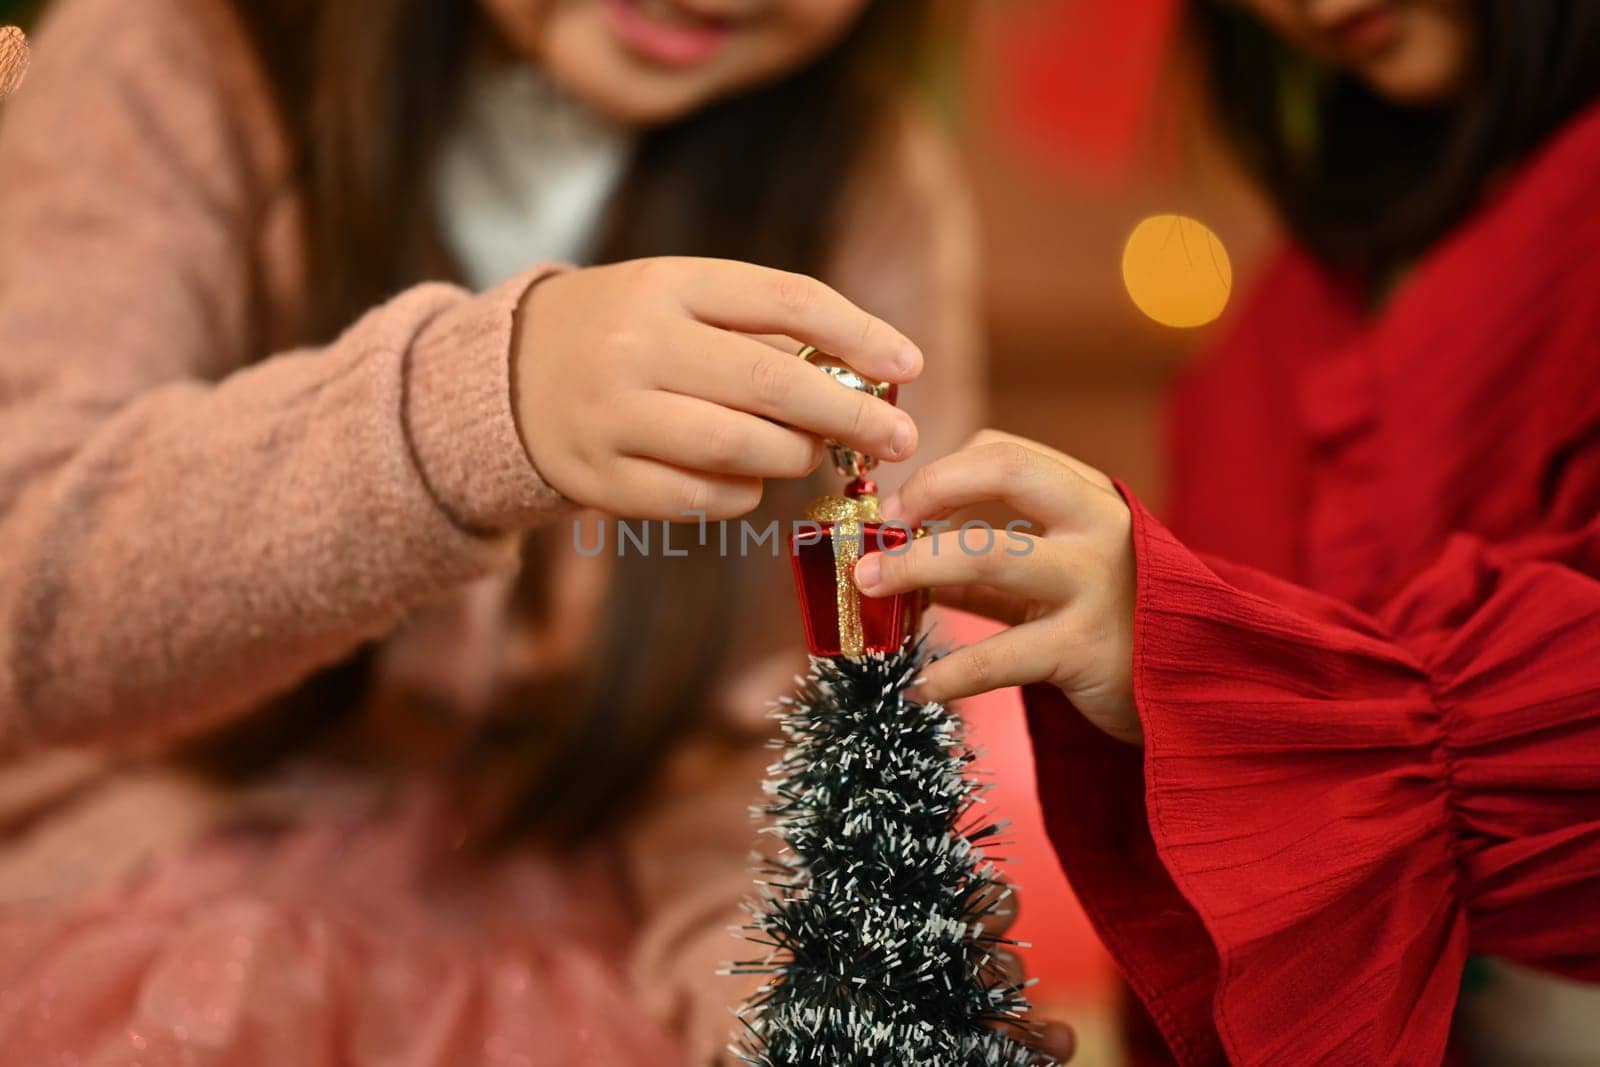 Hands of little children wearing warm winter clothes decorating small Christmas tree in living room.